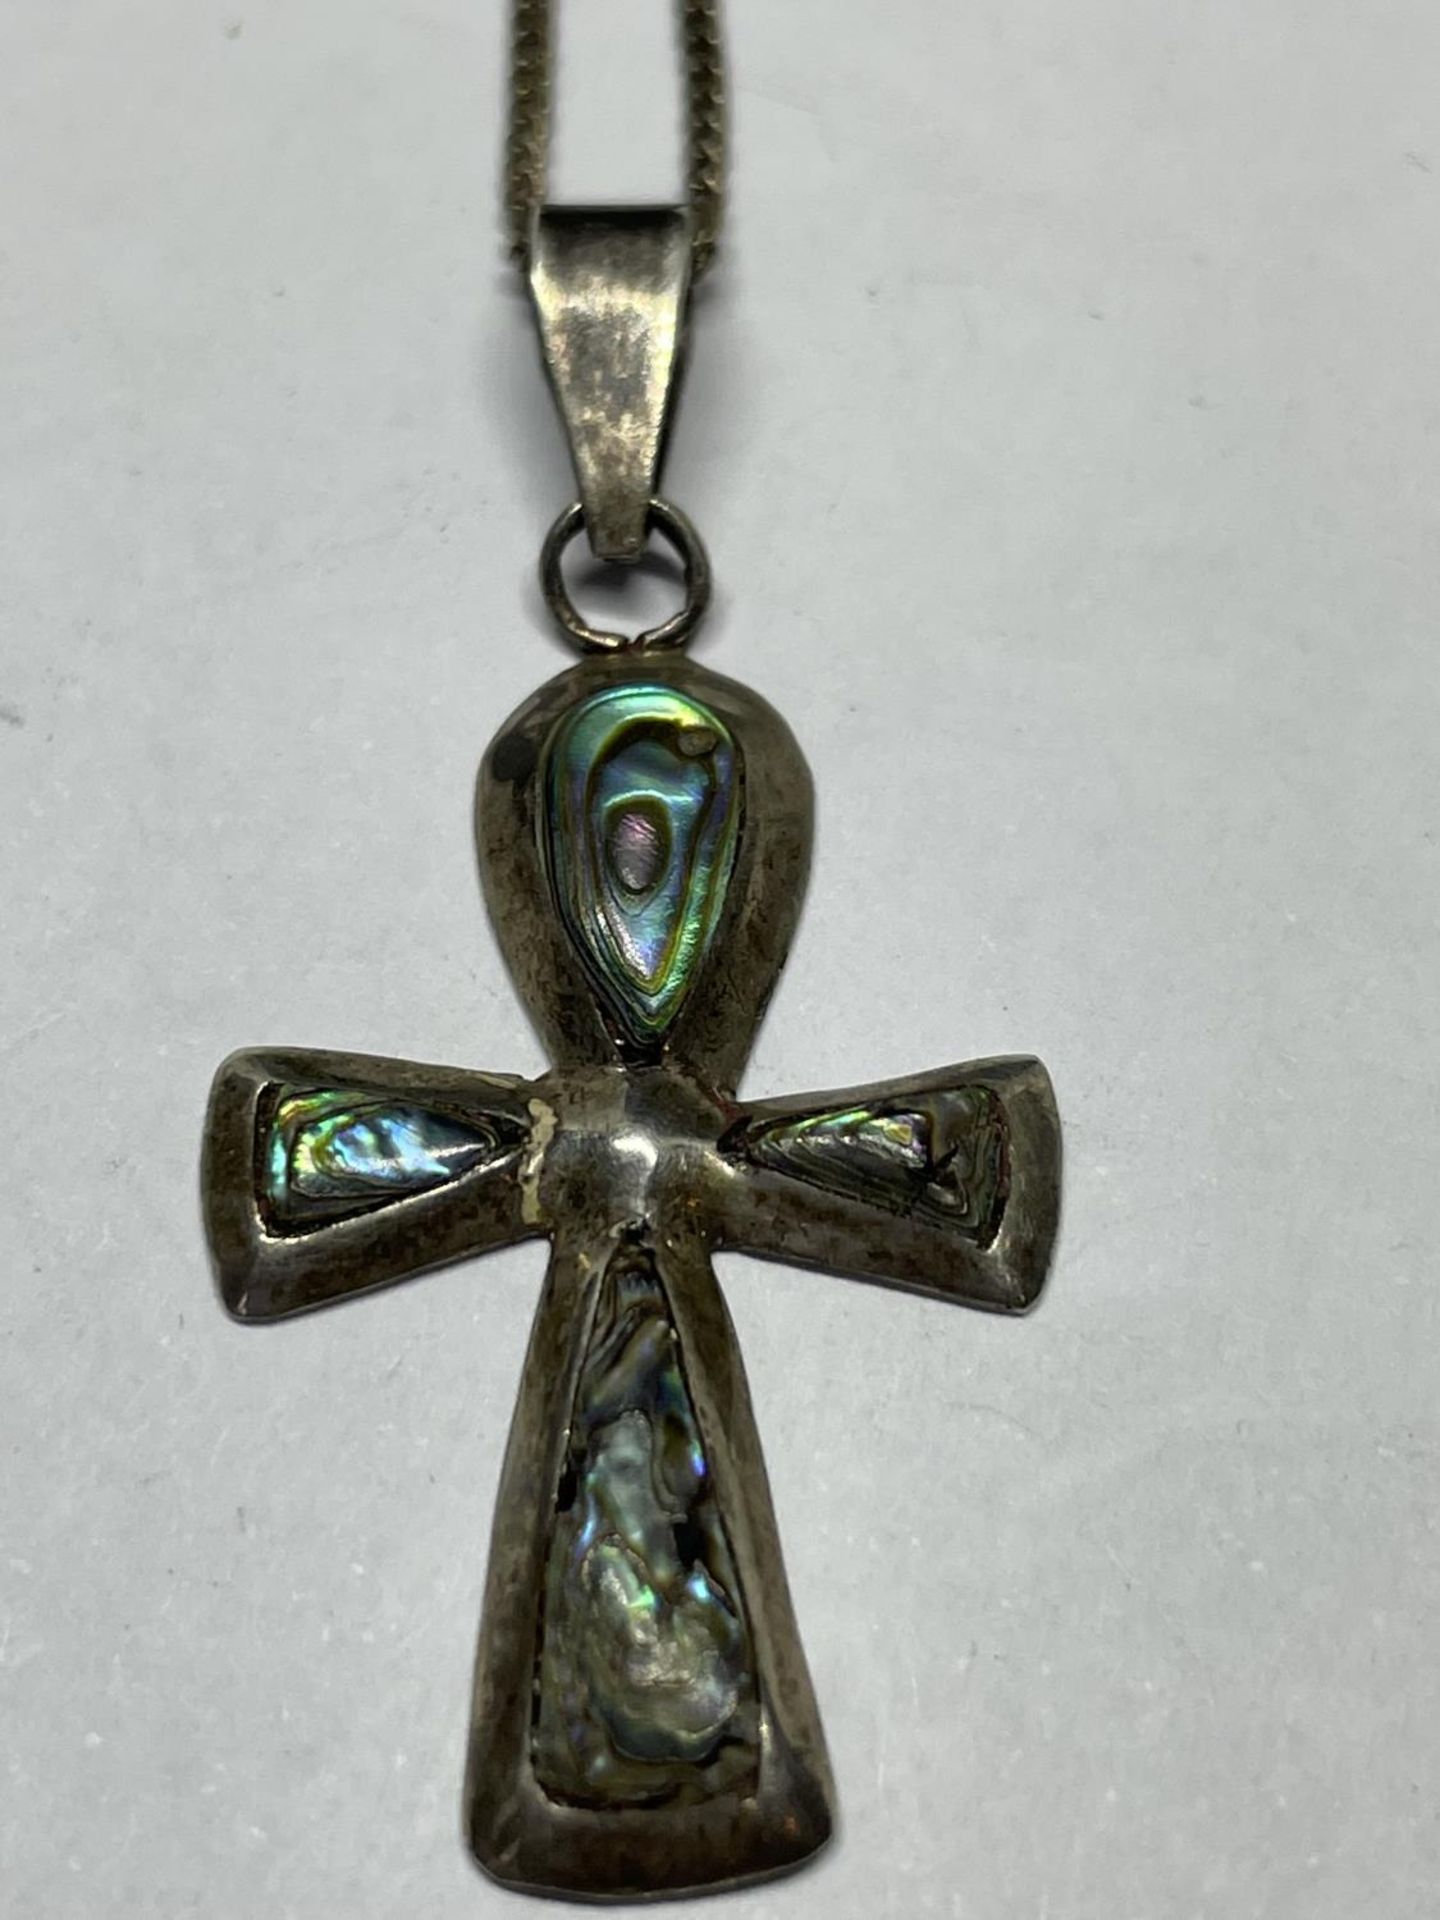 TWO SILVER CROSS PENDANTS ON CHAINS - Image 6 of 8